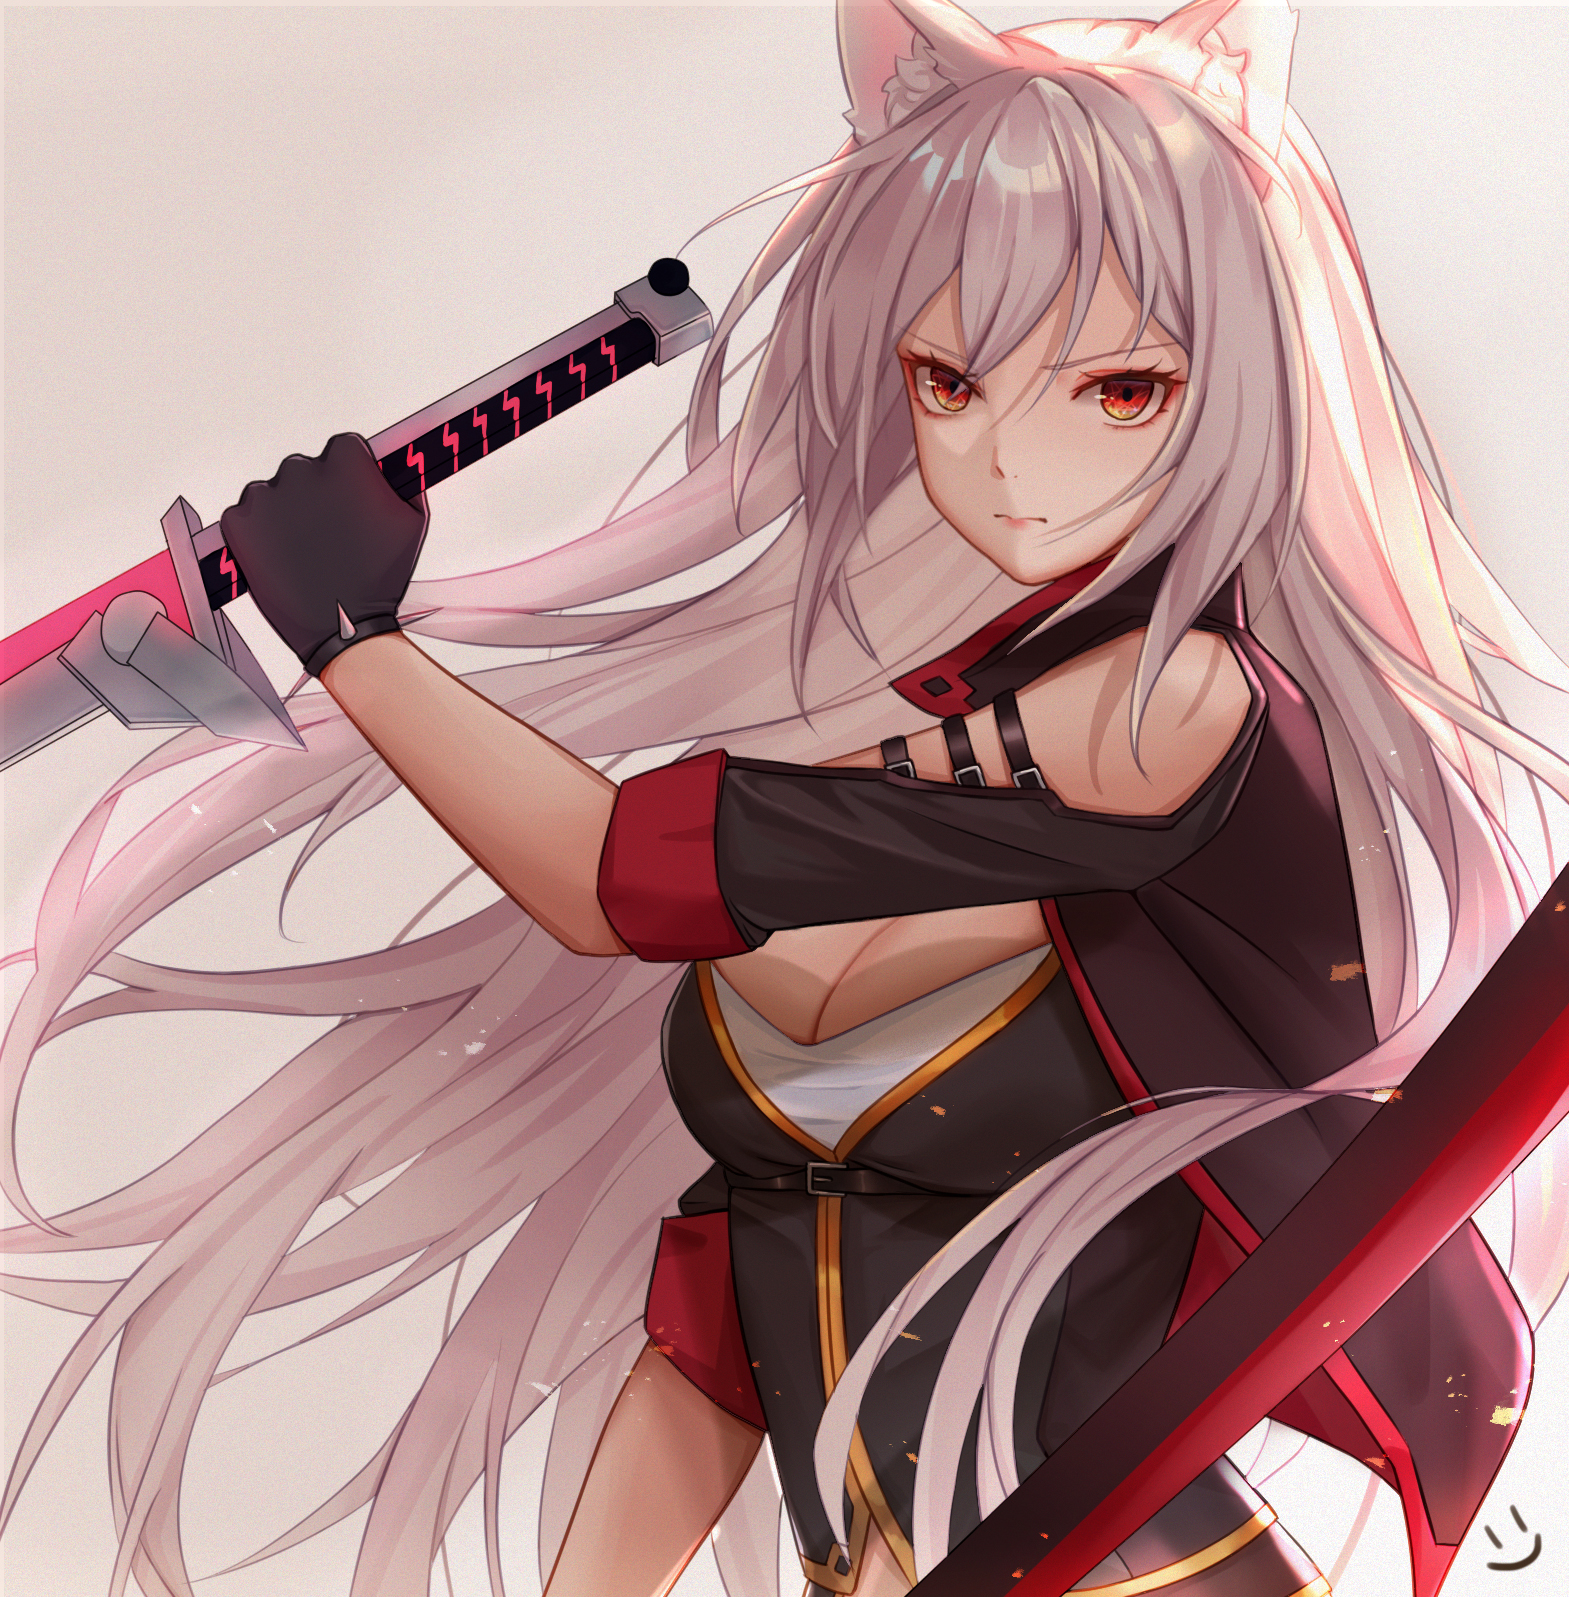 Anime 1569x1597 anime girls Wei Xiao white hair weapon sword boobs cat ears red eyes